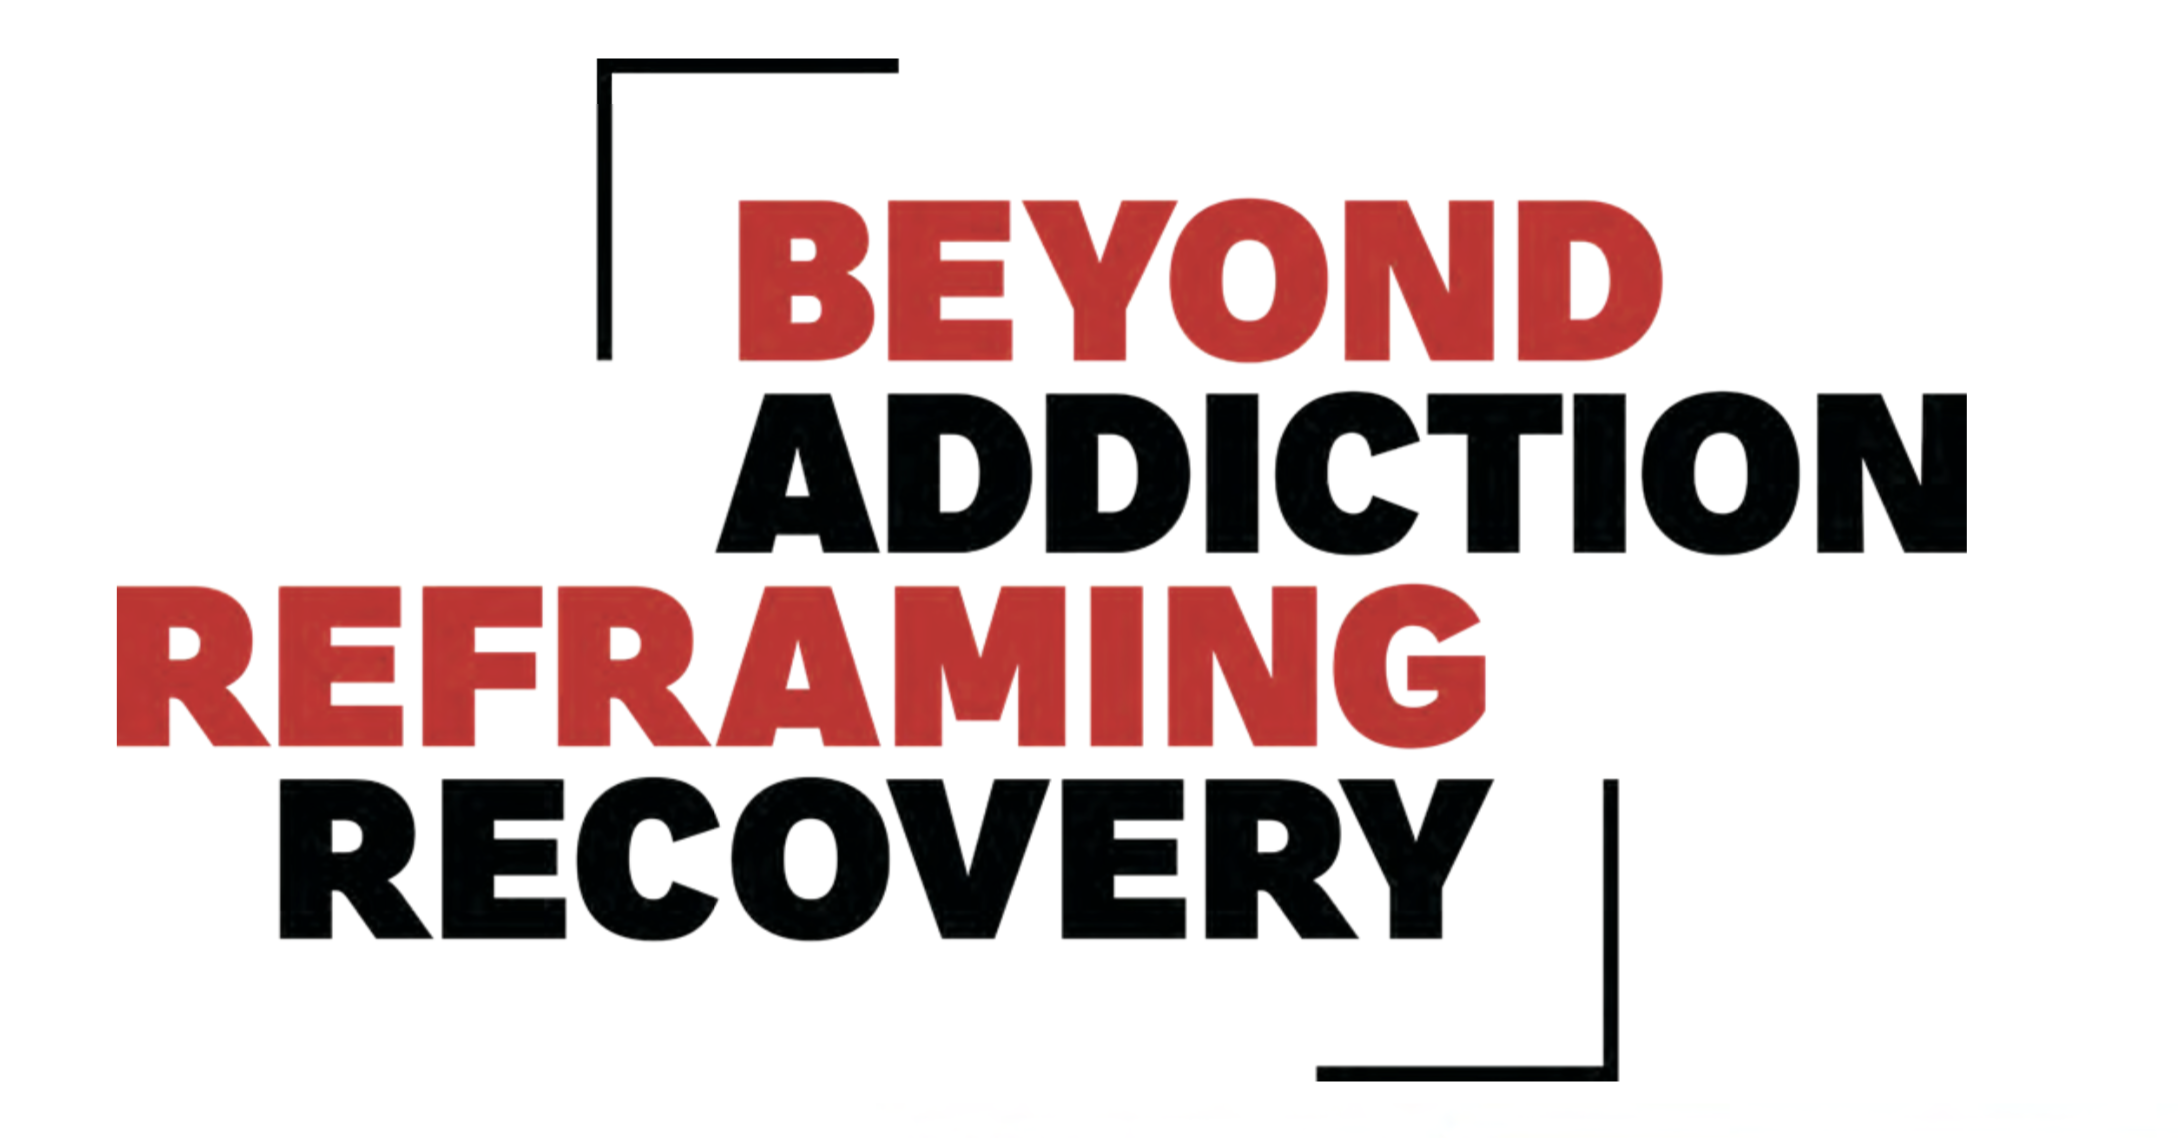 Beyond Addiction, Reframing Recovery - Photography Exhibit 